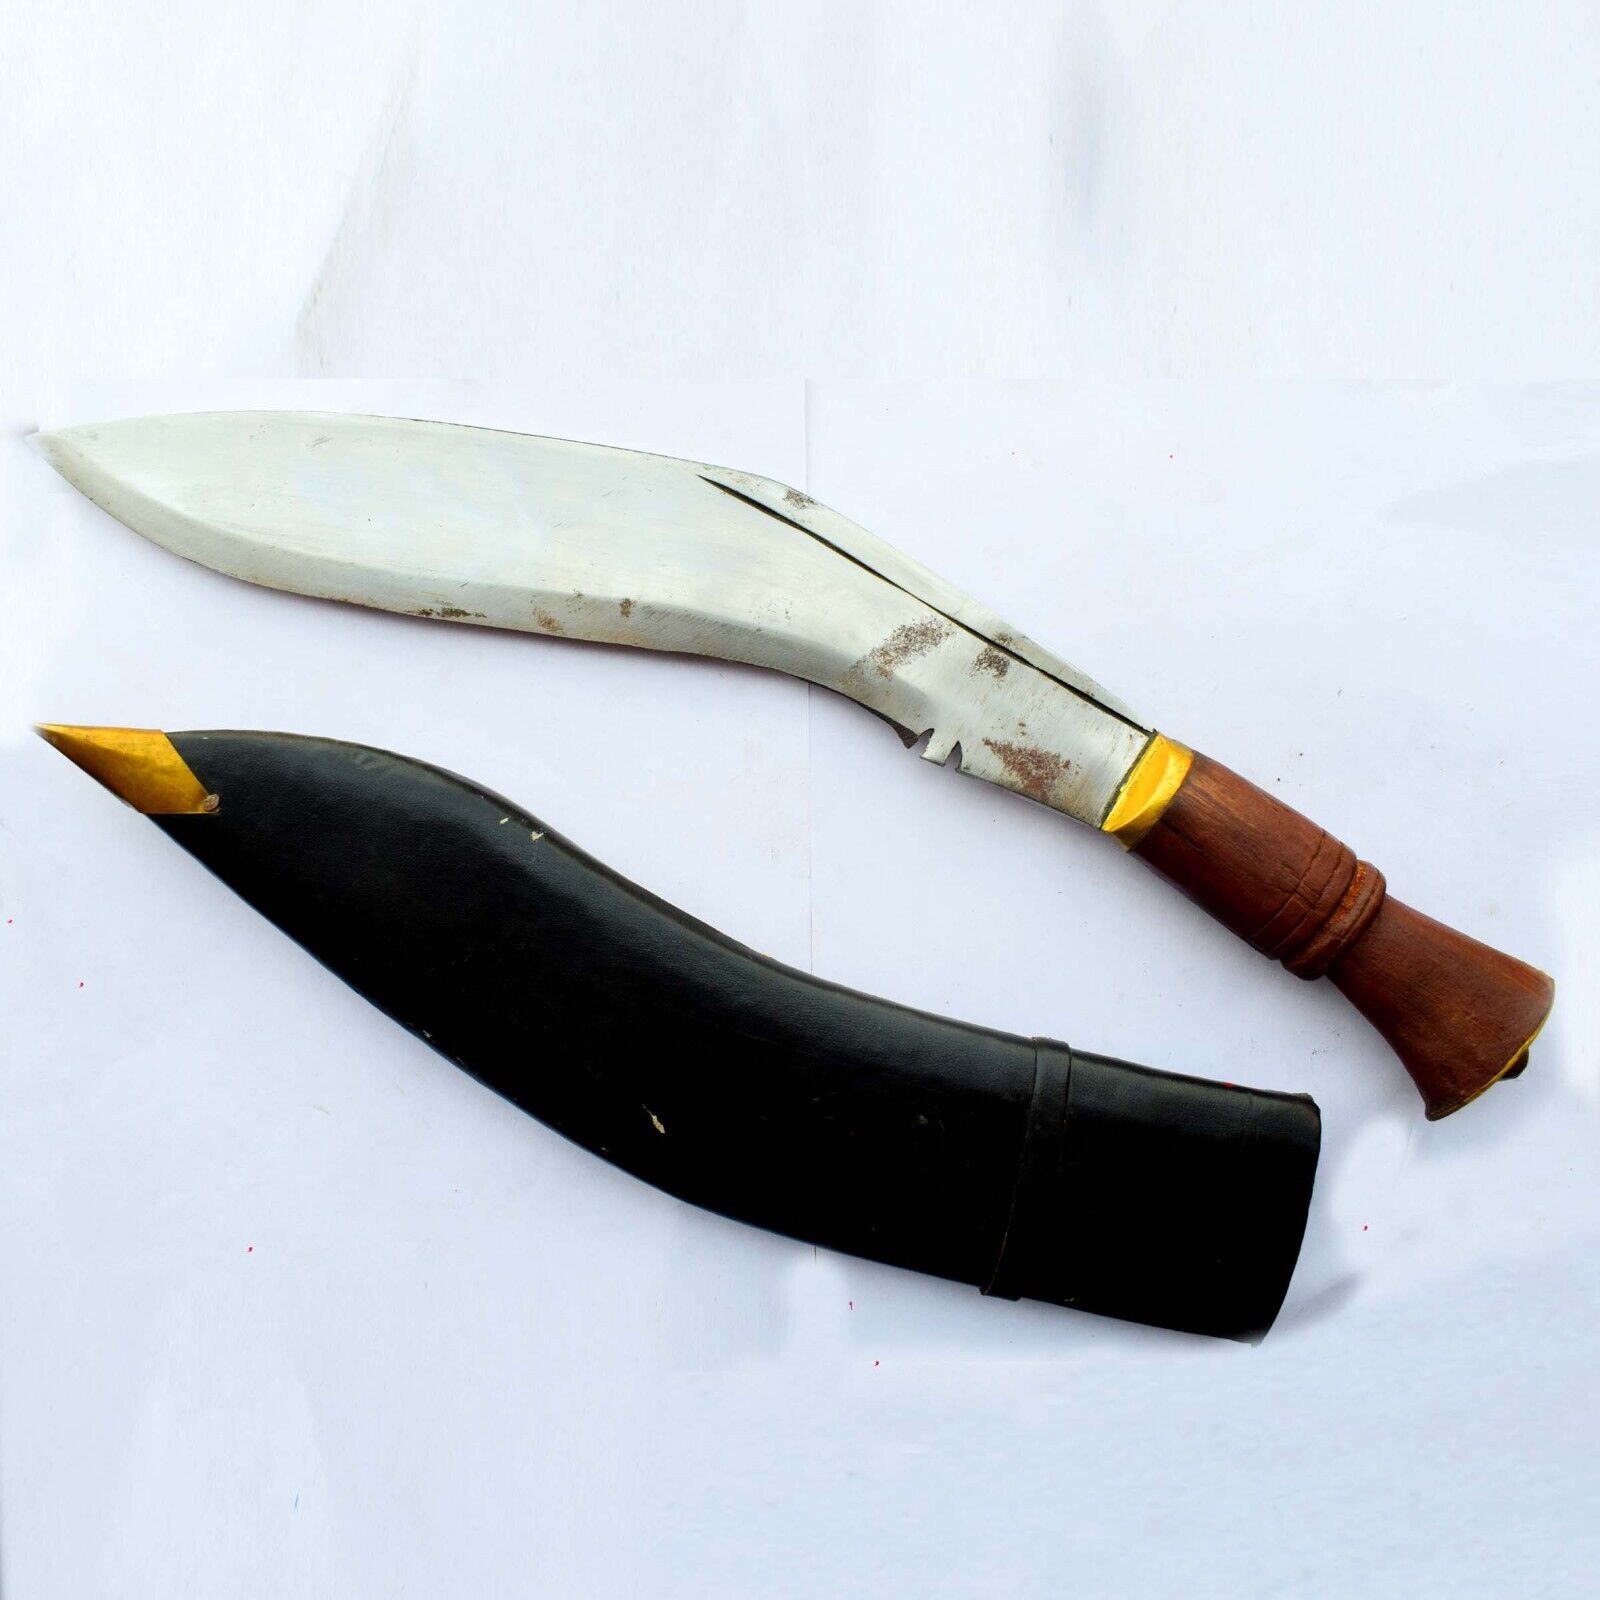 Handcrafted Modern Reproduction Khukri Knife Dagger 17 Inches with Leather Grips